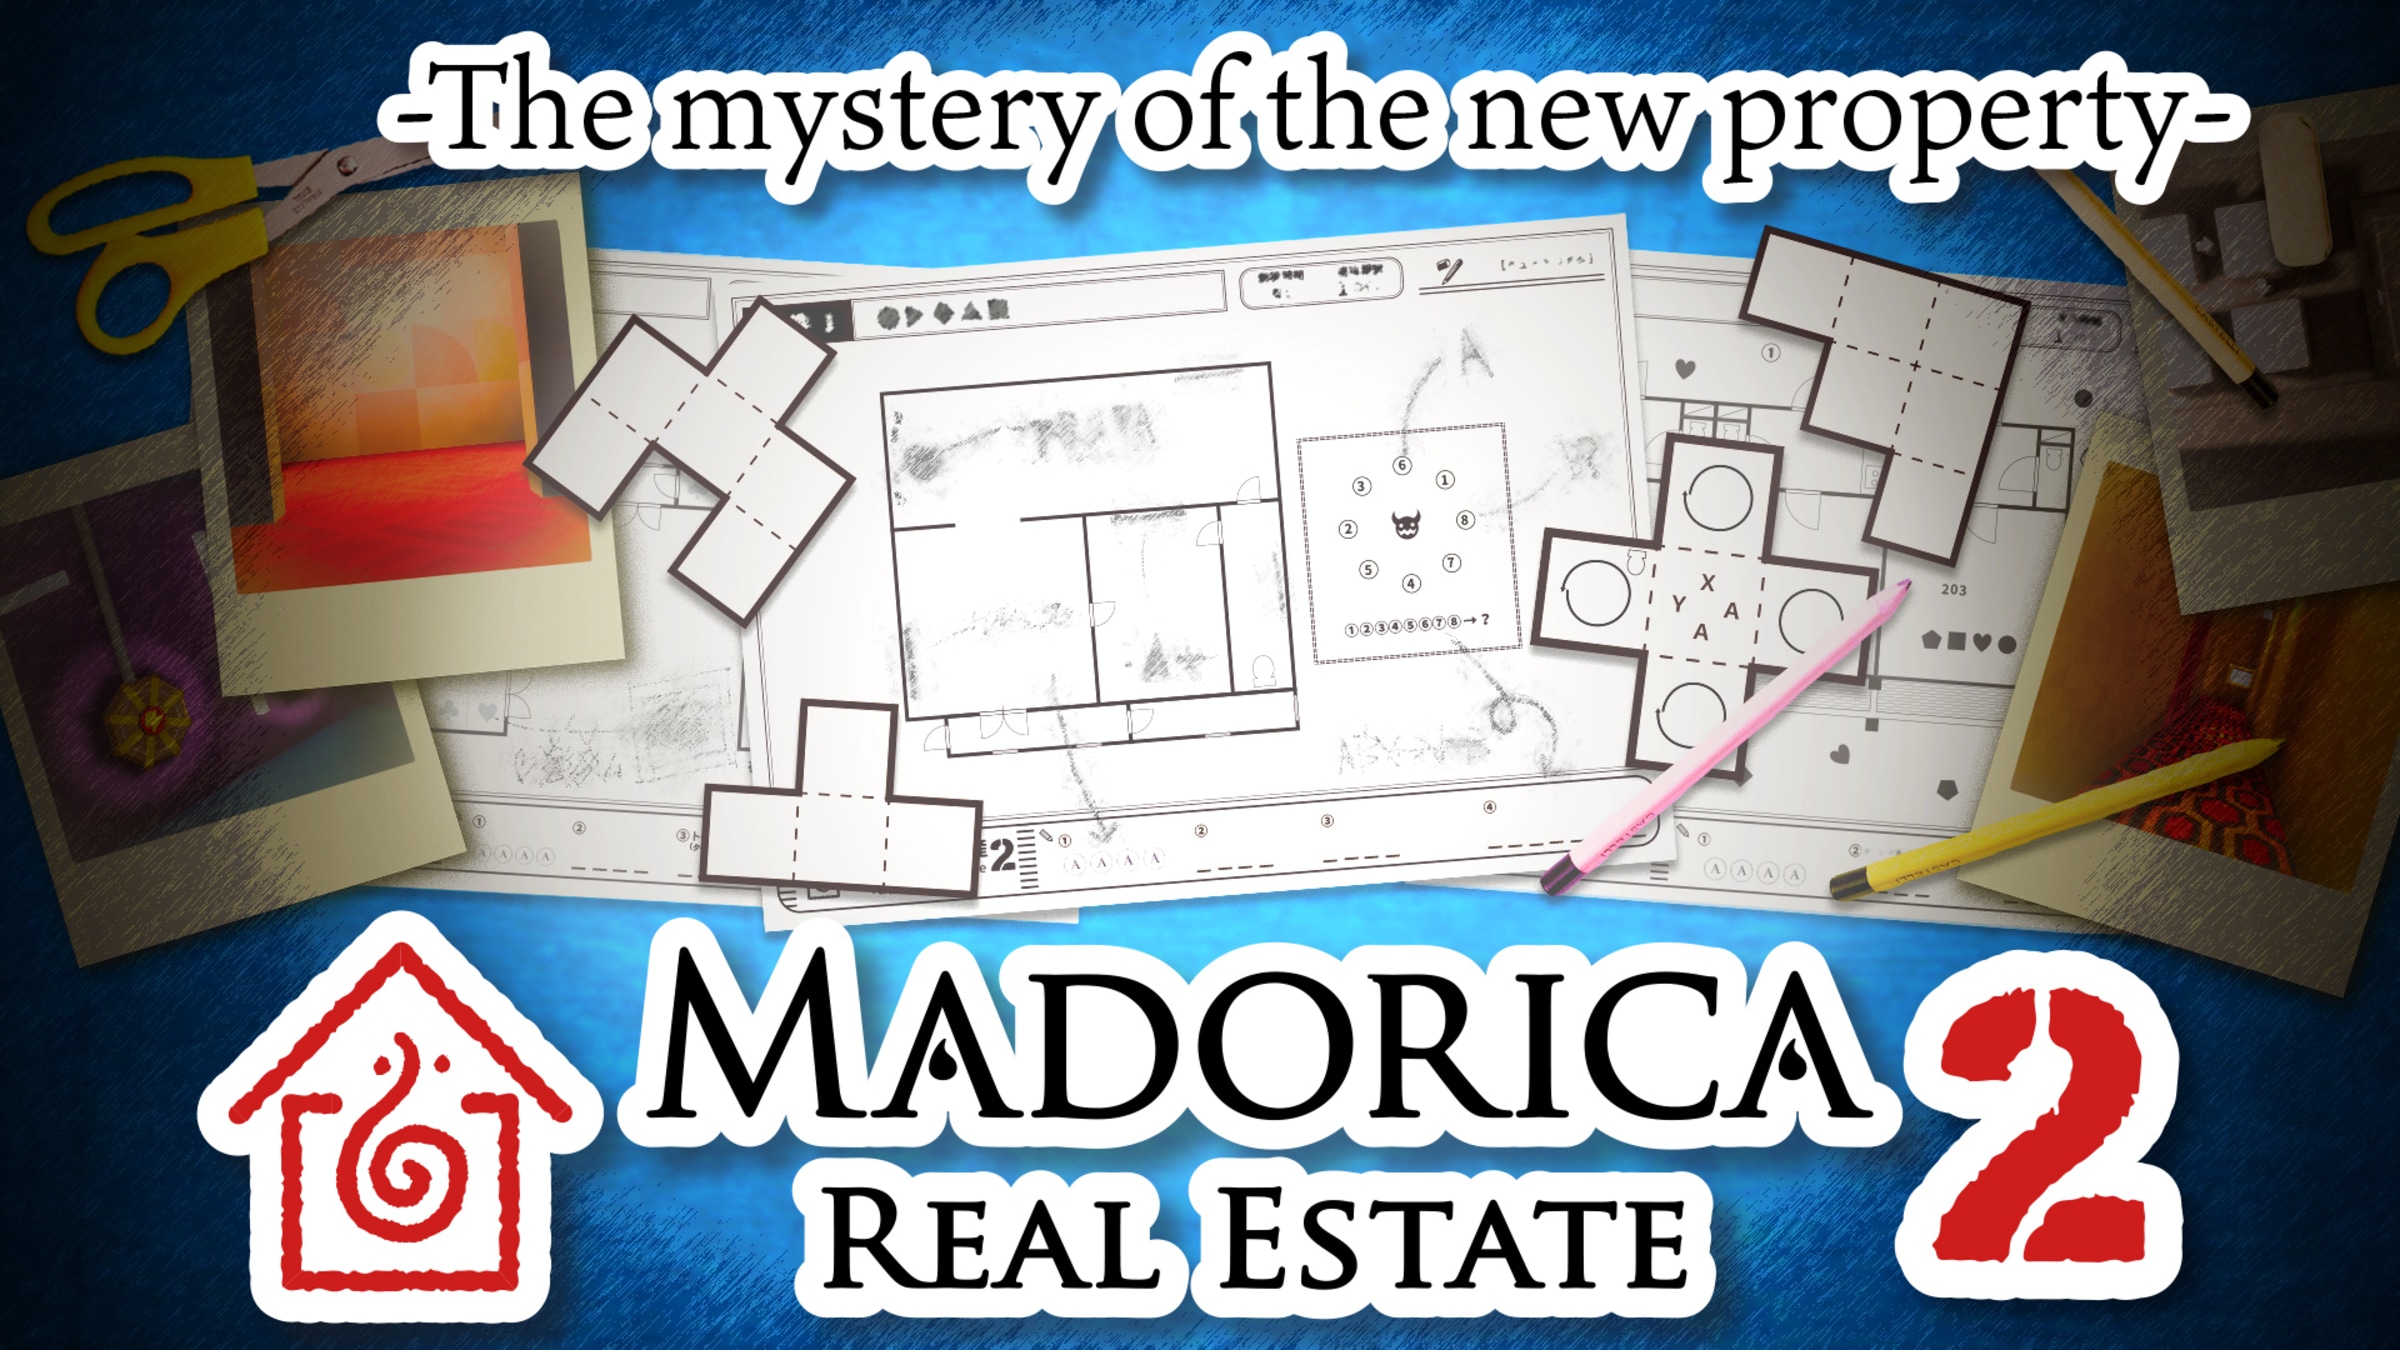 https://assets.nintendo.com/image/upload/c_fill,w_1200/q_auto:best/f_auto/dpr_2.0/ncom/en_US/games/switch/m/madorica-real-state-2-the-mystery-of-the-new-property-switch/